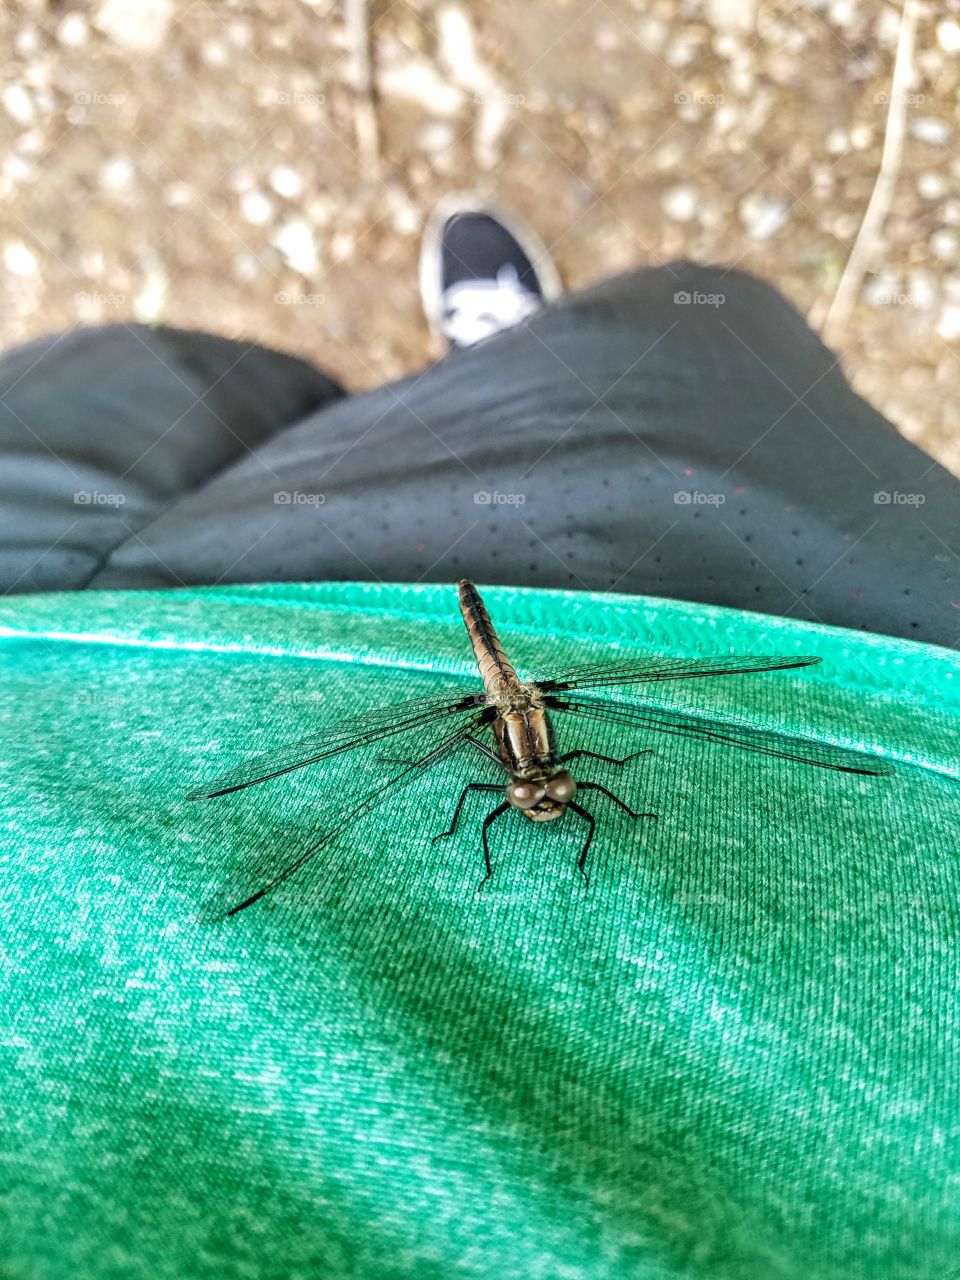 Dragonfly resting on a green shirt